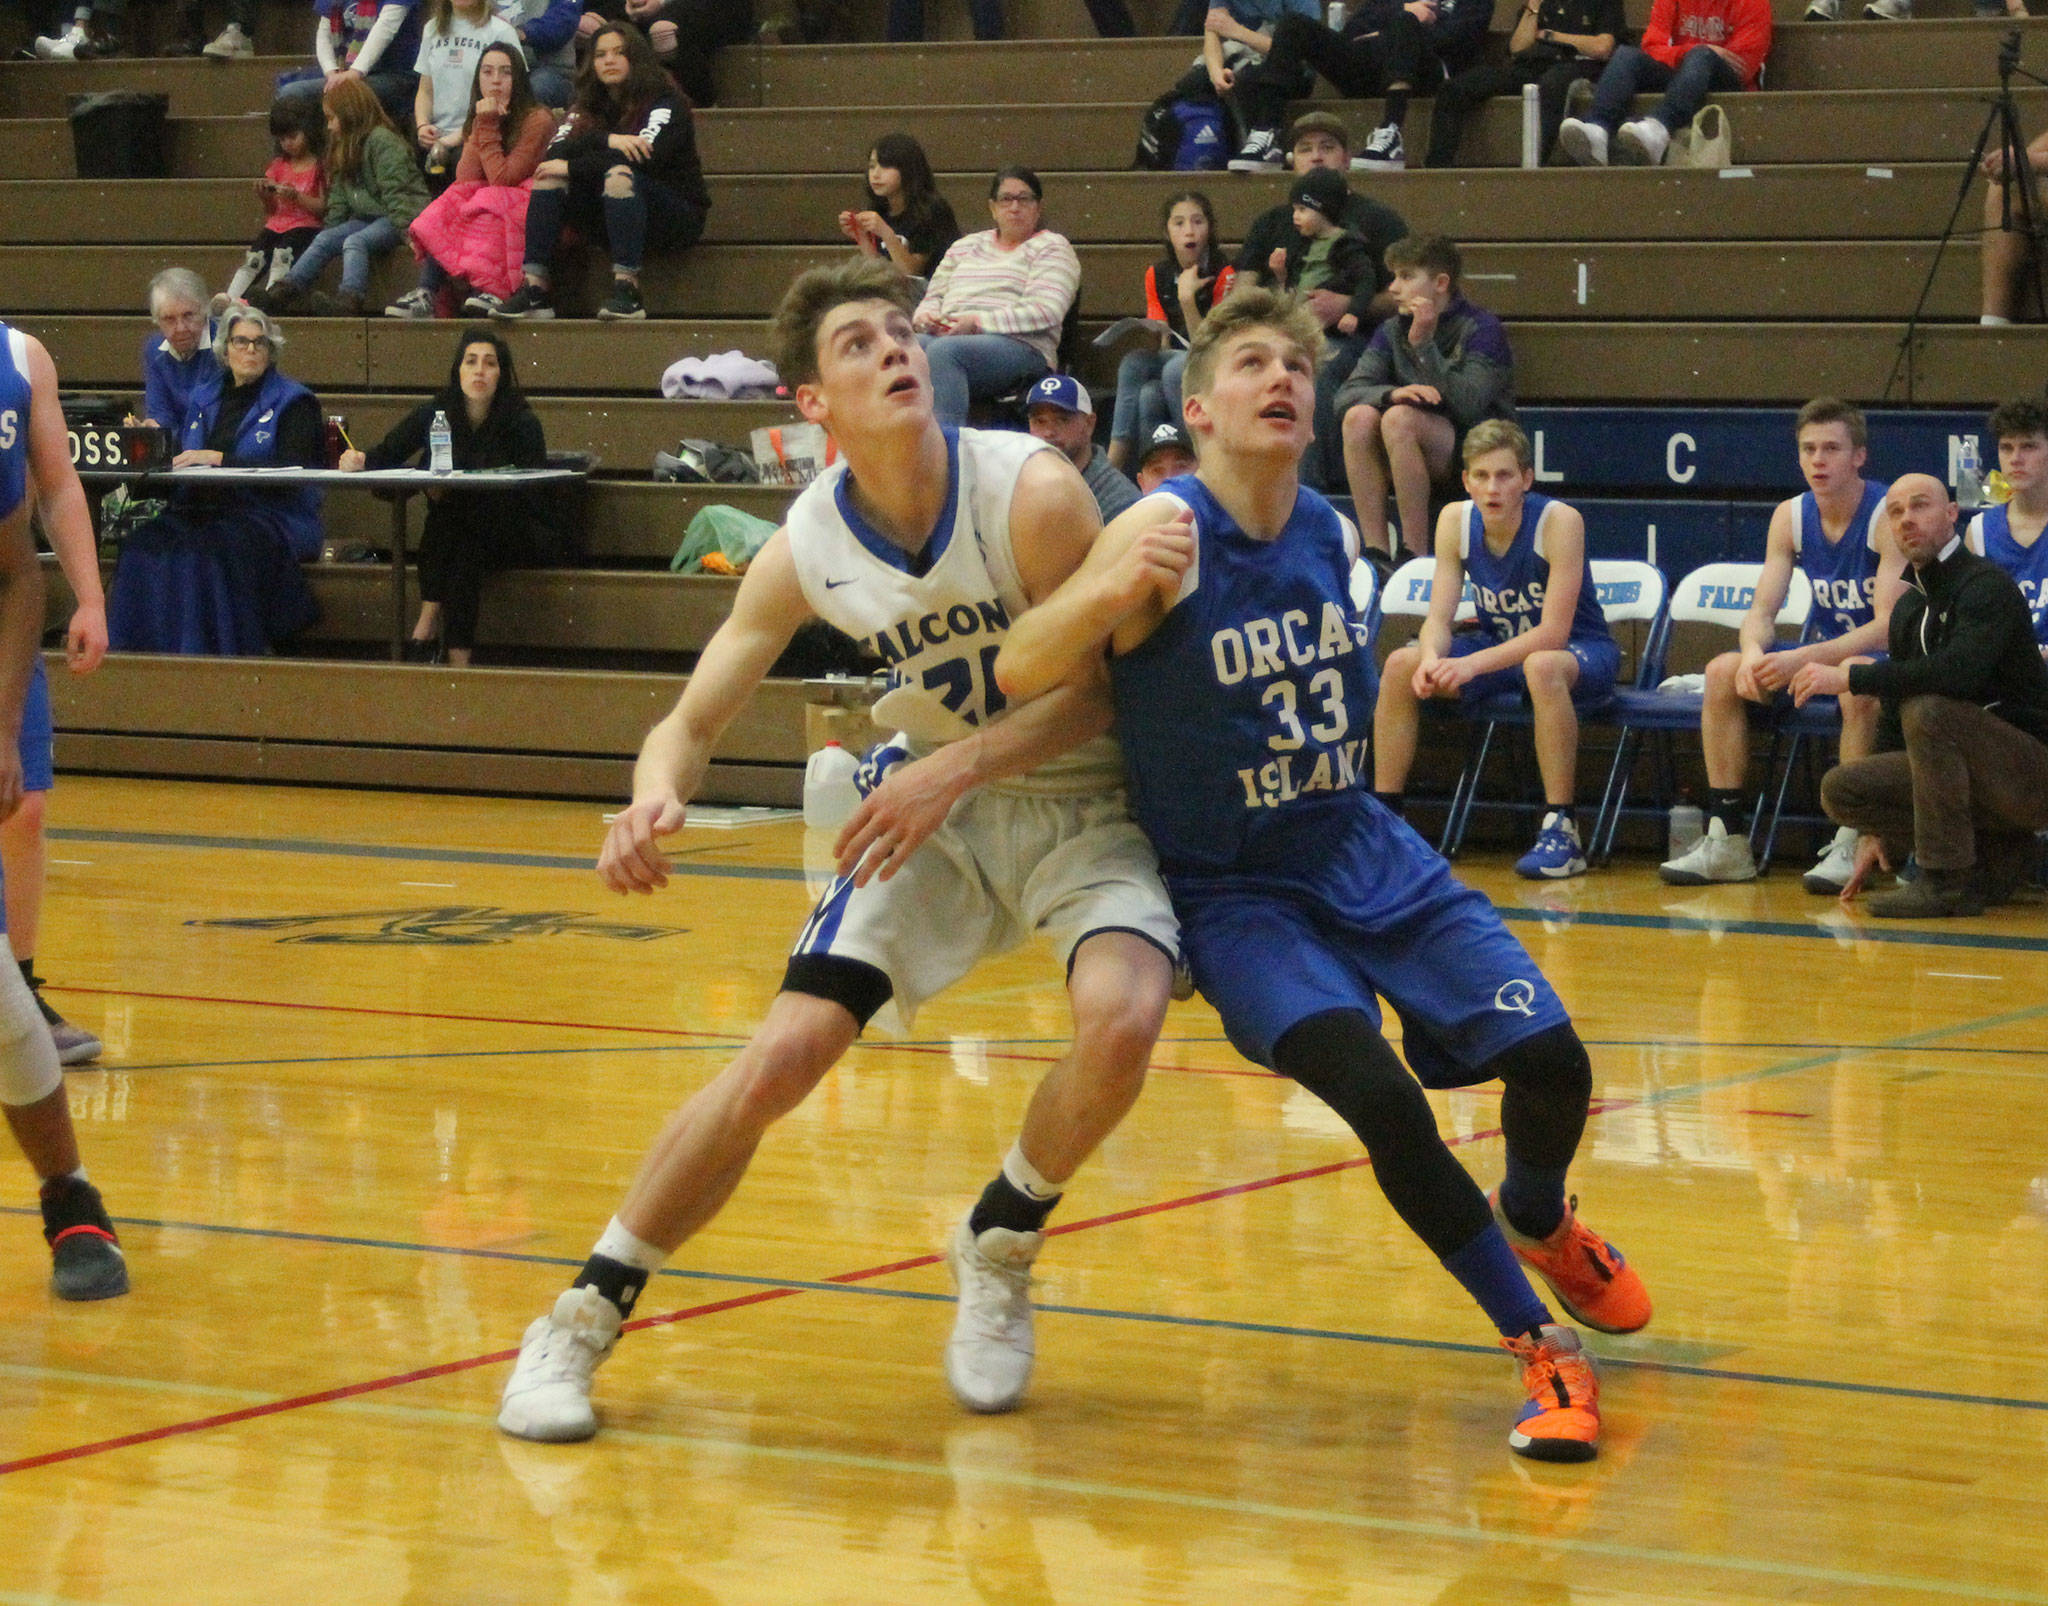 South Whidbey’s Carson Wrightson fights Orcas Island’s August Groeninger (33) for rebounding position.(Photo by Jim Waller/South Whidbey Record)